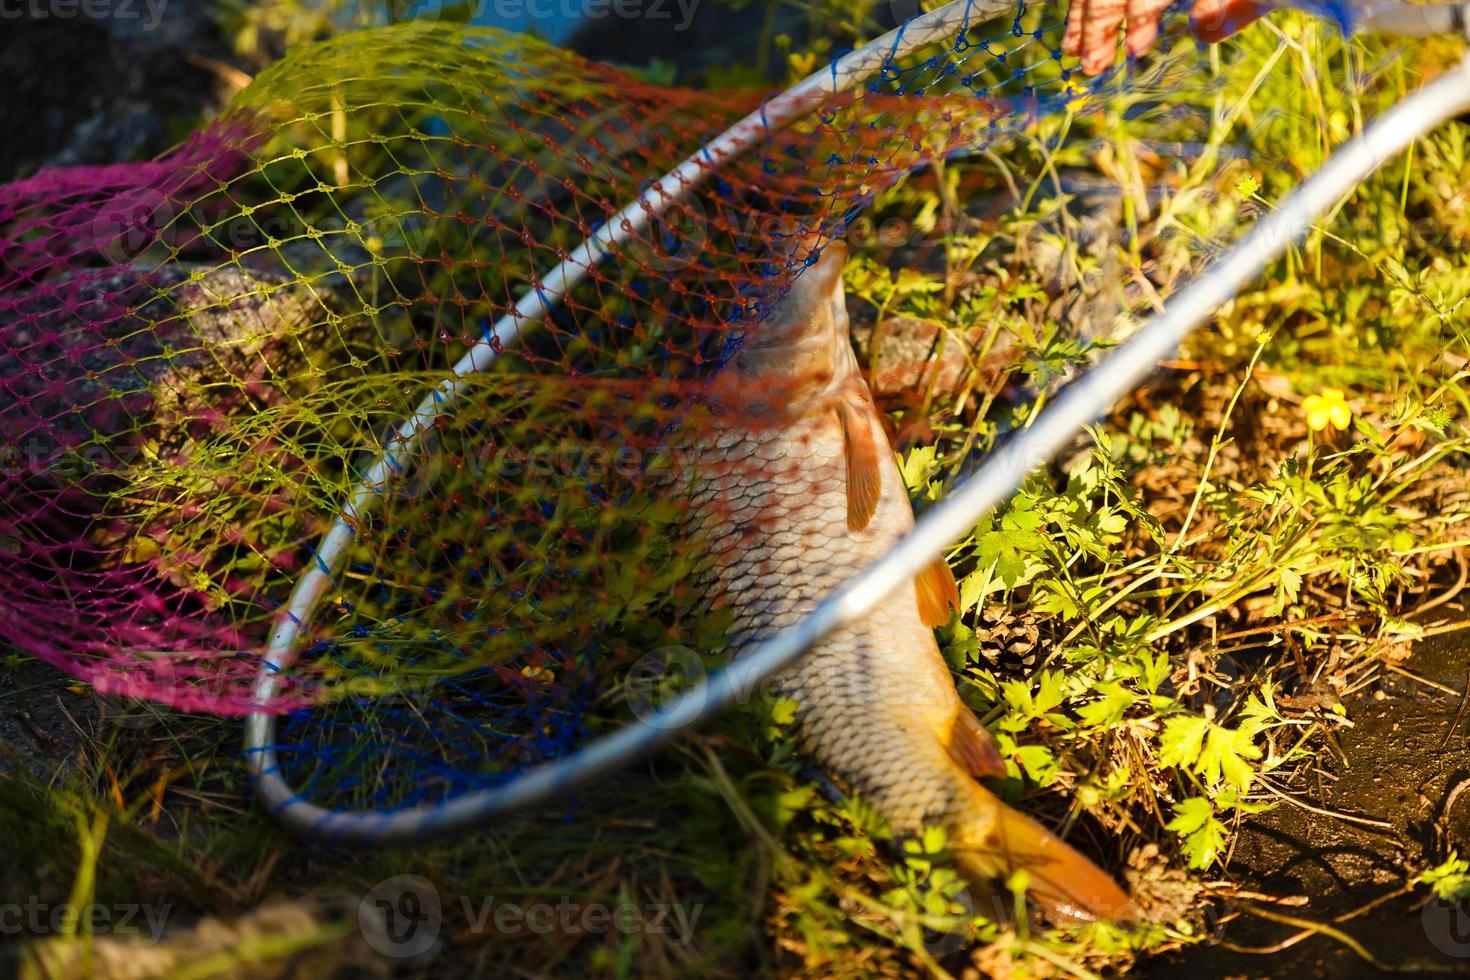 A hand net for scooping fish in water. photo